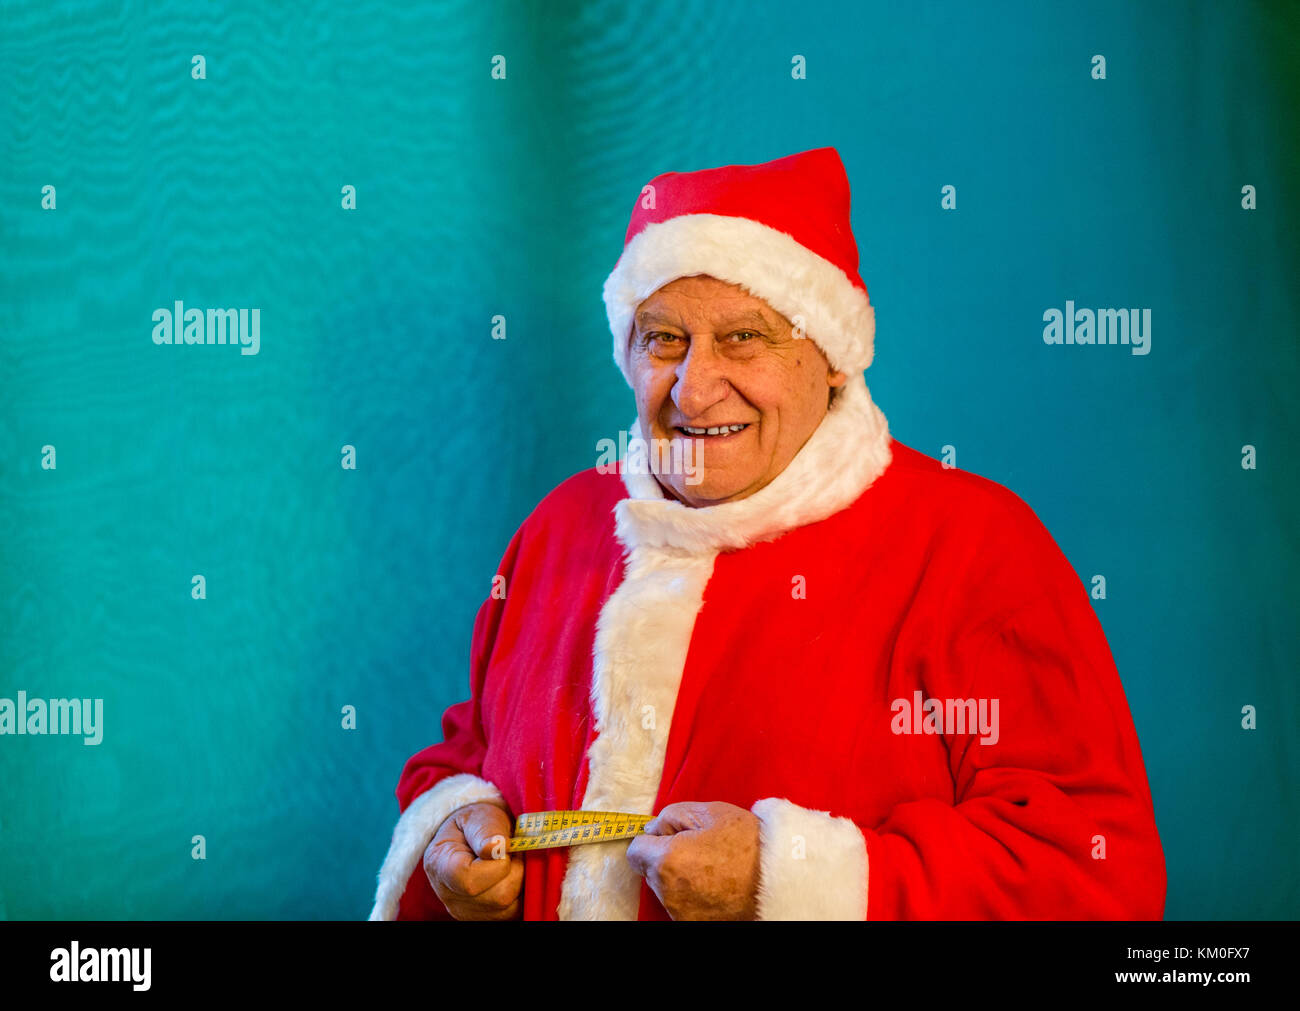 old man wearing Santa Claus costume smiling and measuring the circumference of his belly with a tape measure Stock Photo